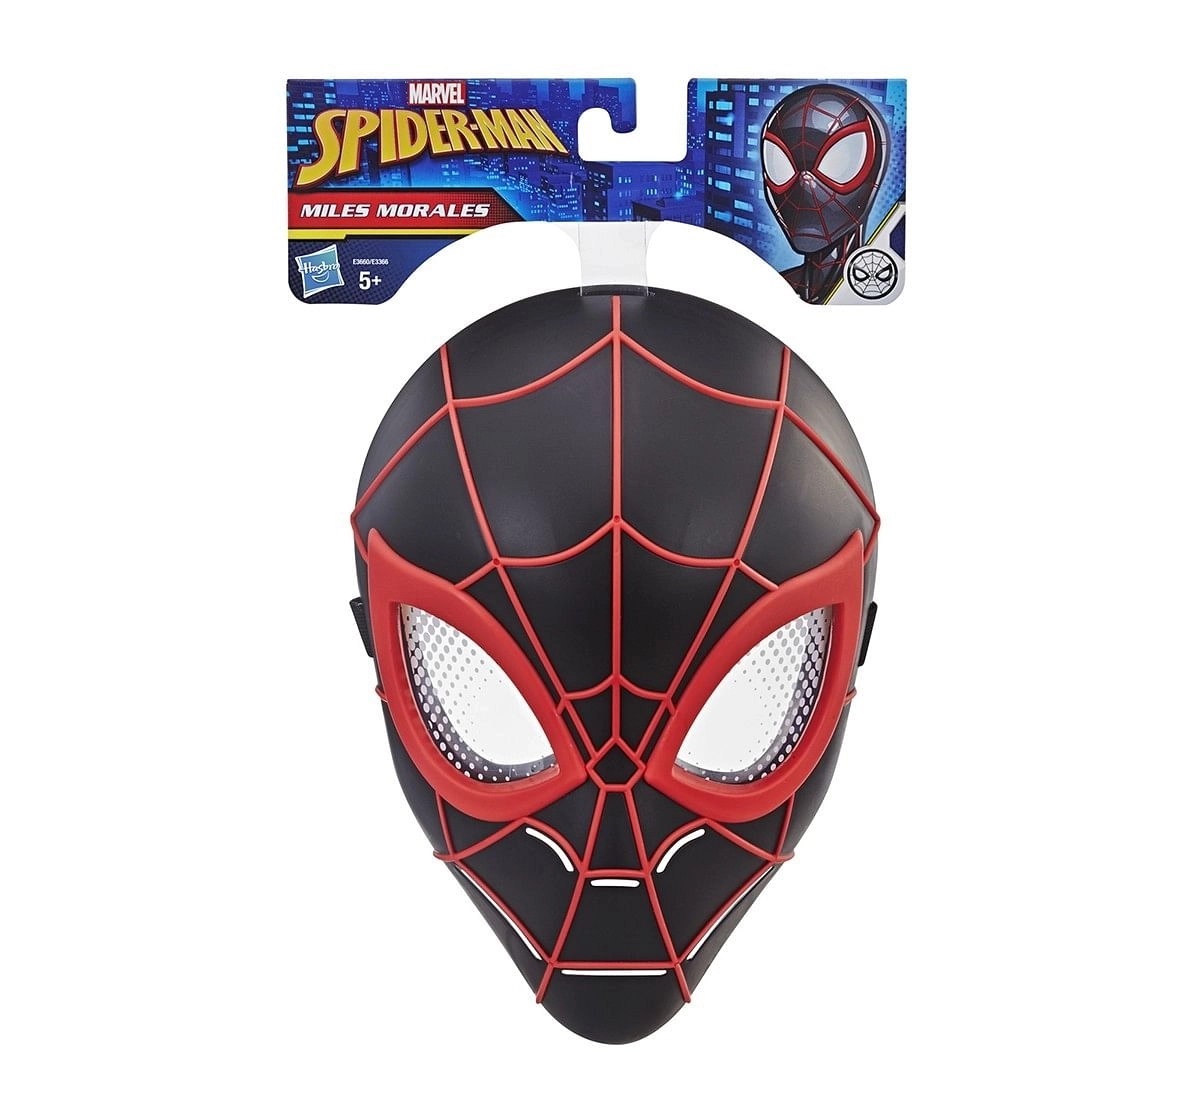 Marvel Spider-Man Hero Mask Assorted Action Figure Play Sets for Kids age 5Y+ 